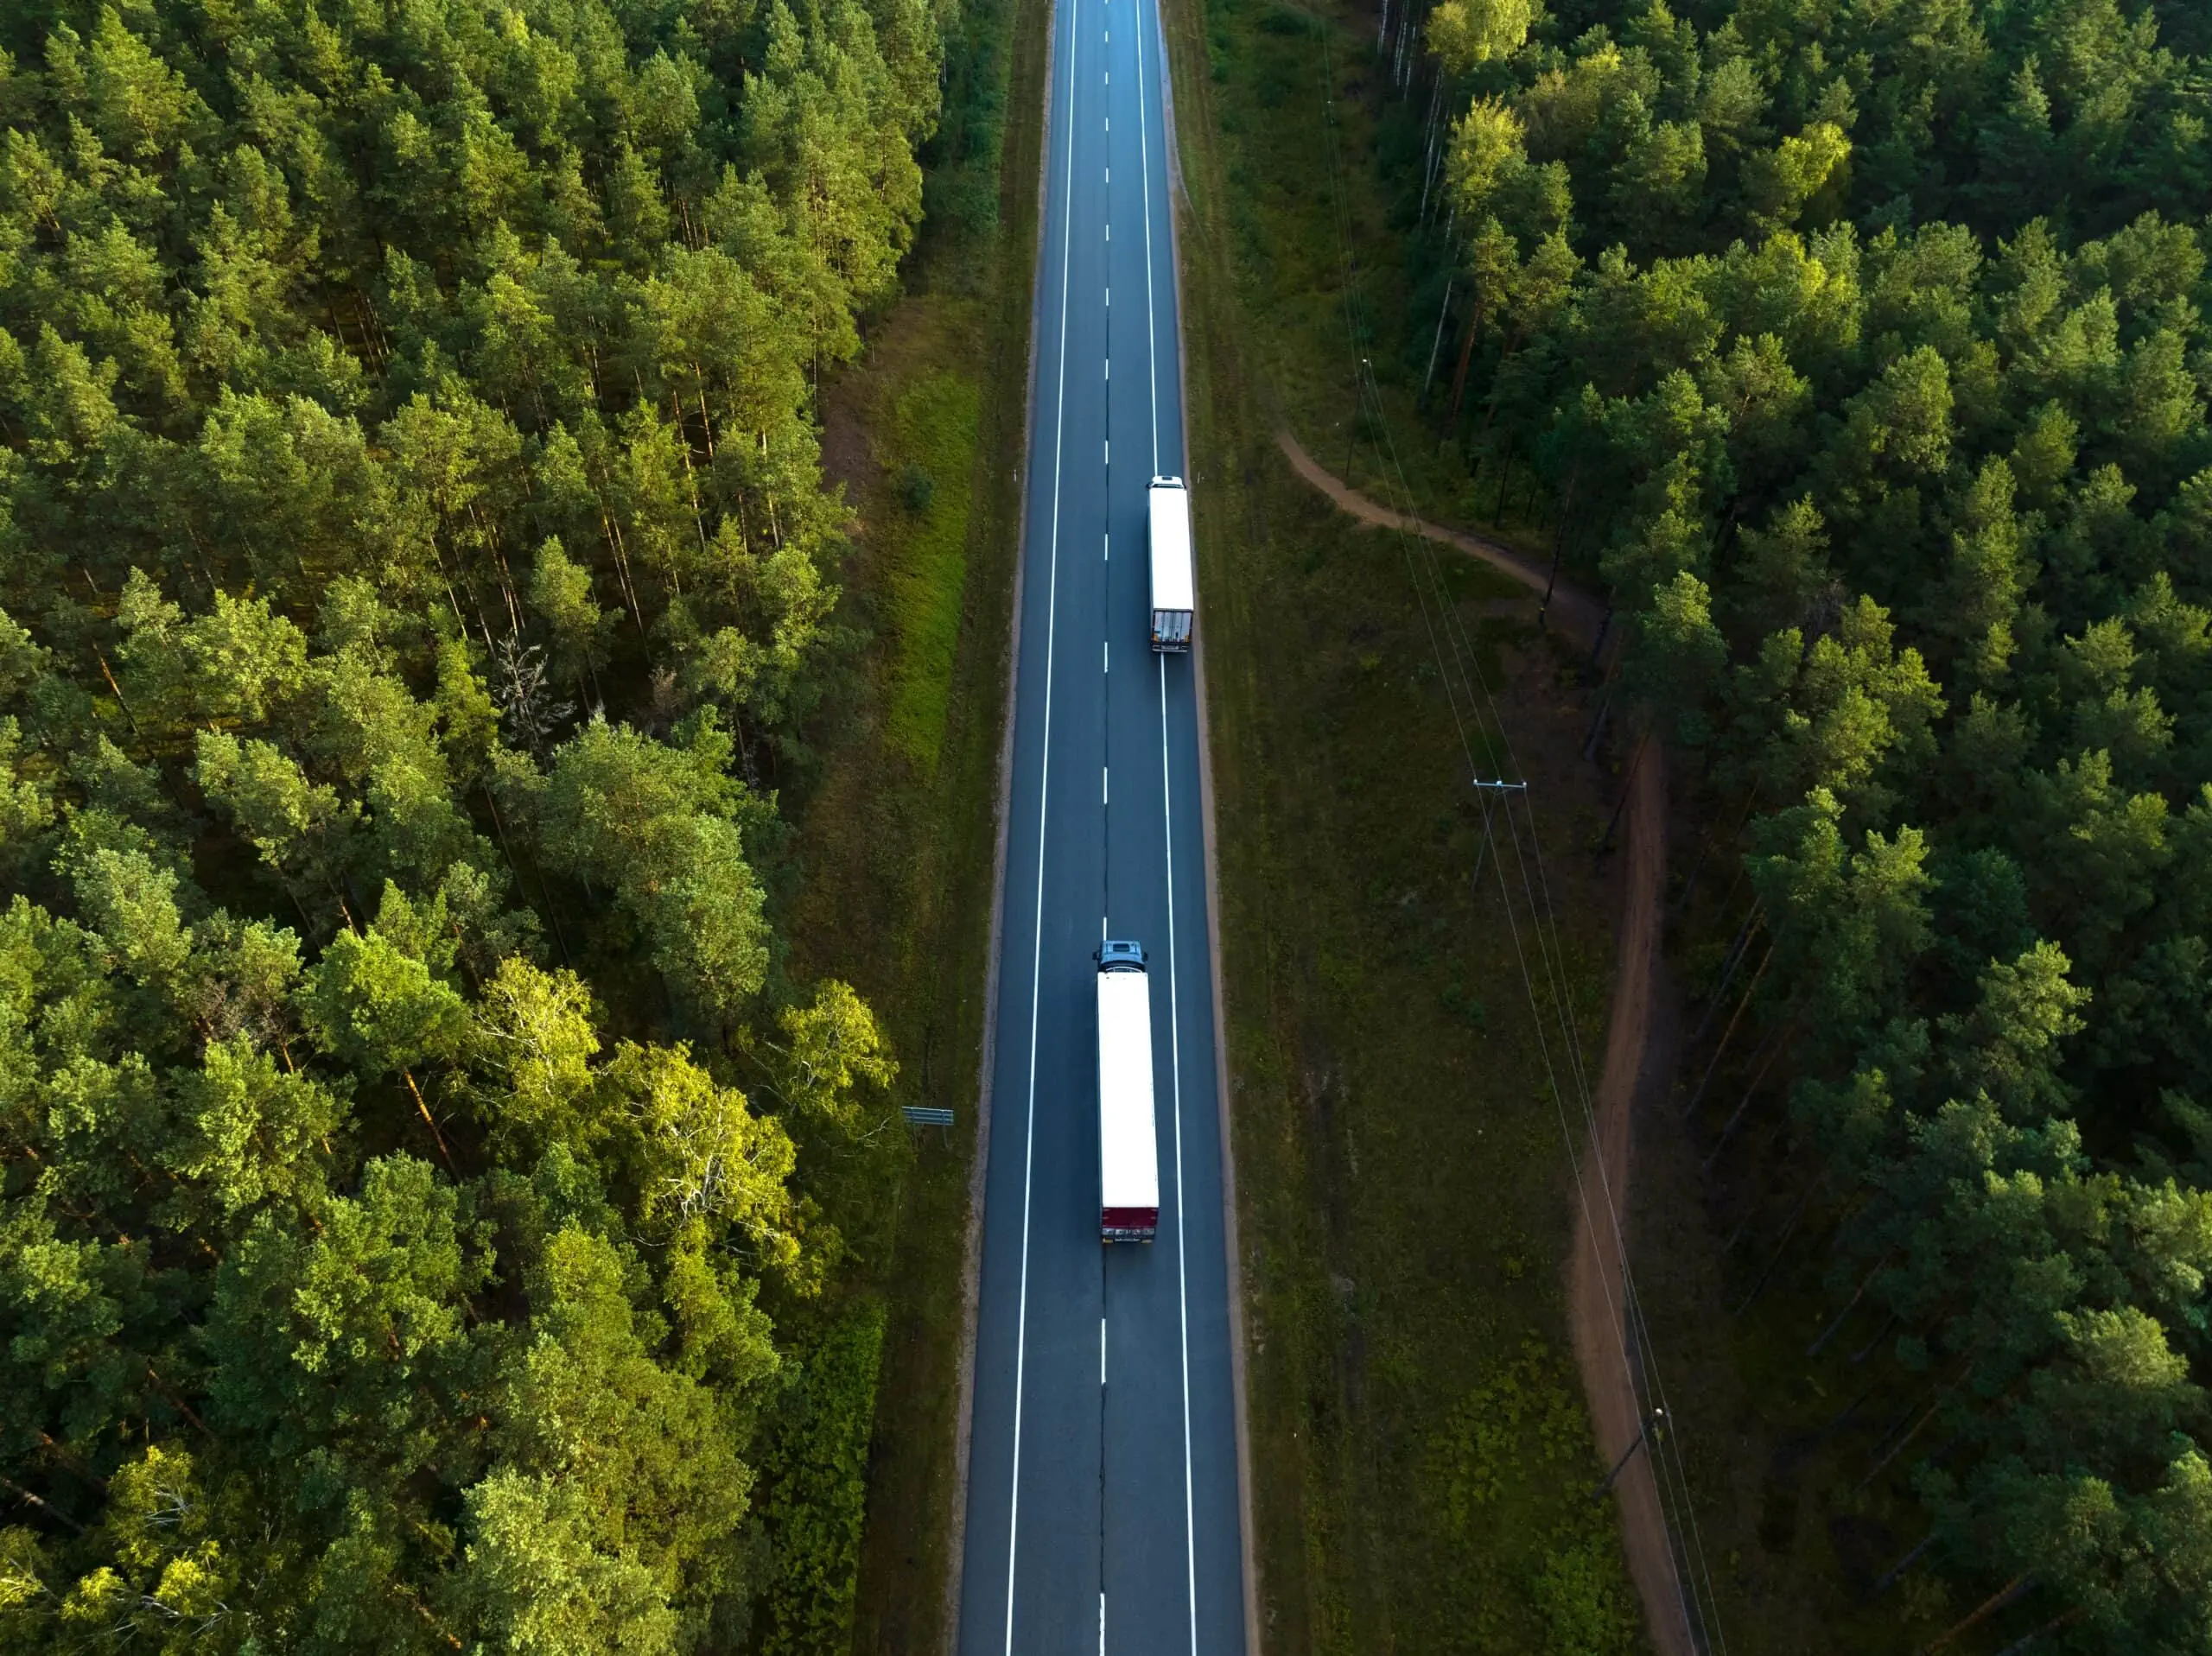 https://monarchconnected.com/wp-content/uploads/2023/06/Semi-trucks-on-highway-and-secure-with-trucker-dash-camera-scaled.webp